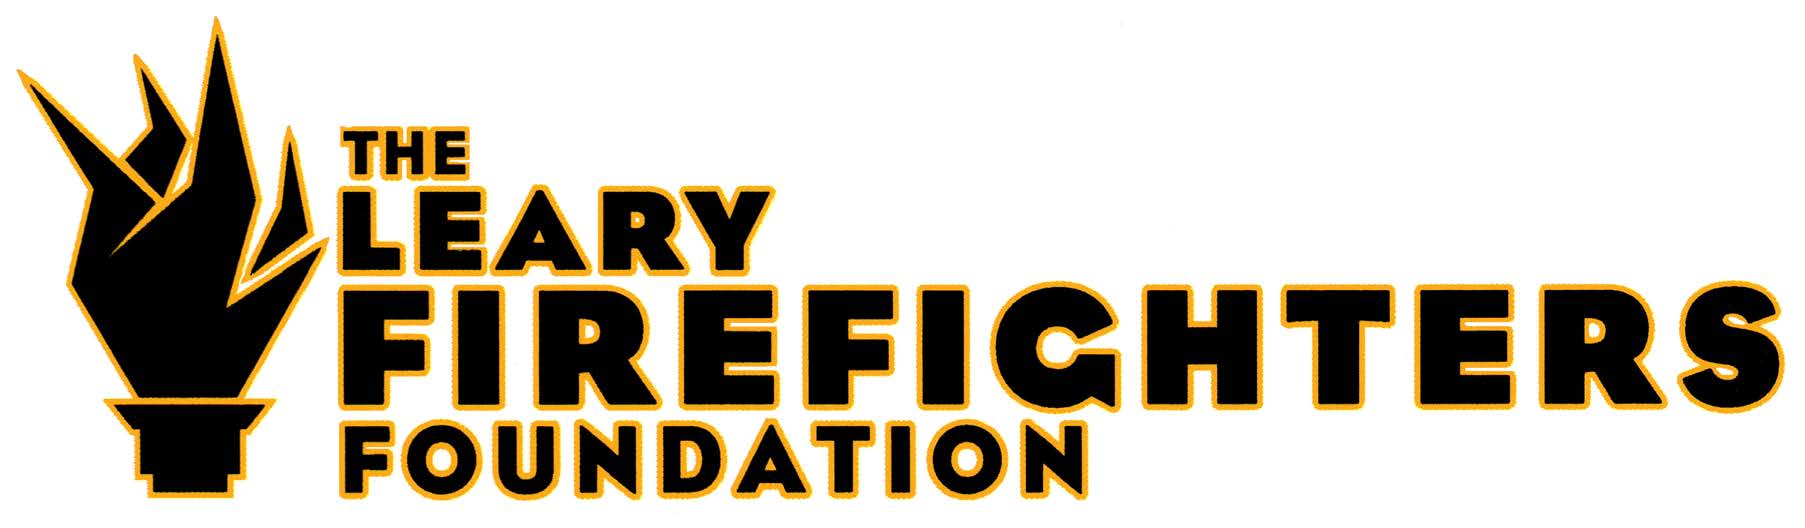 Leary Firefighters Foundation logo